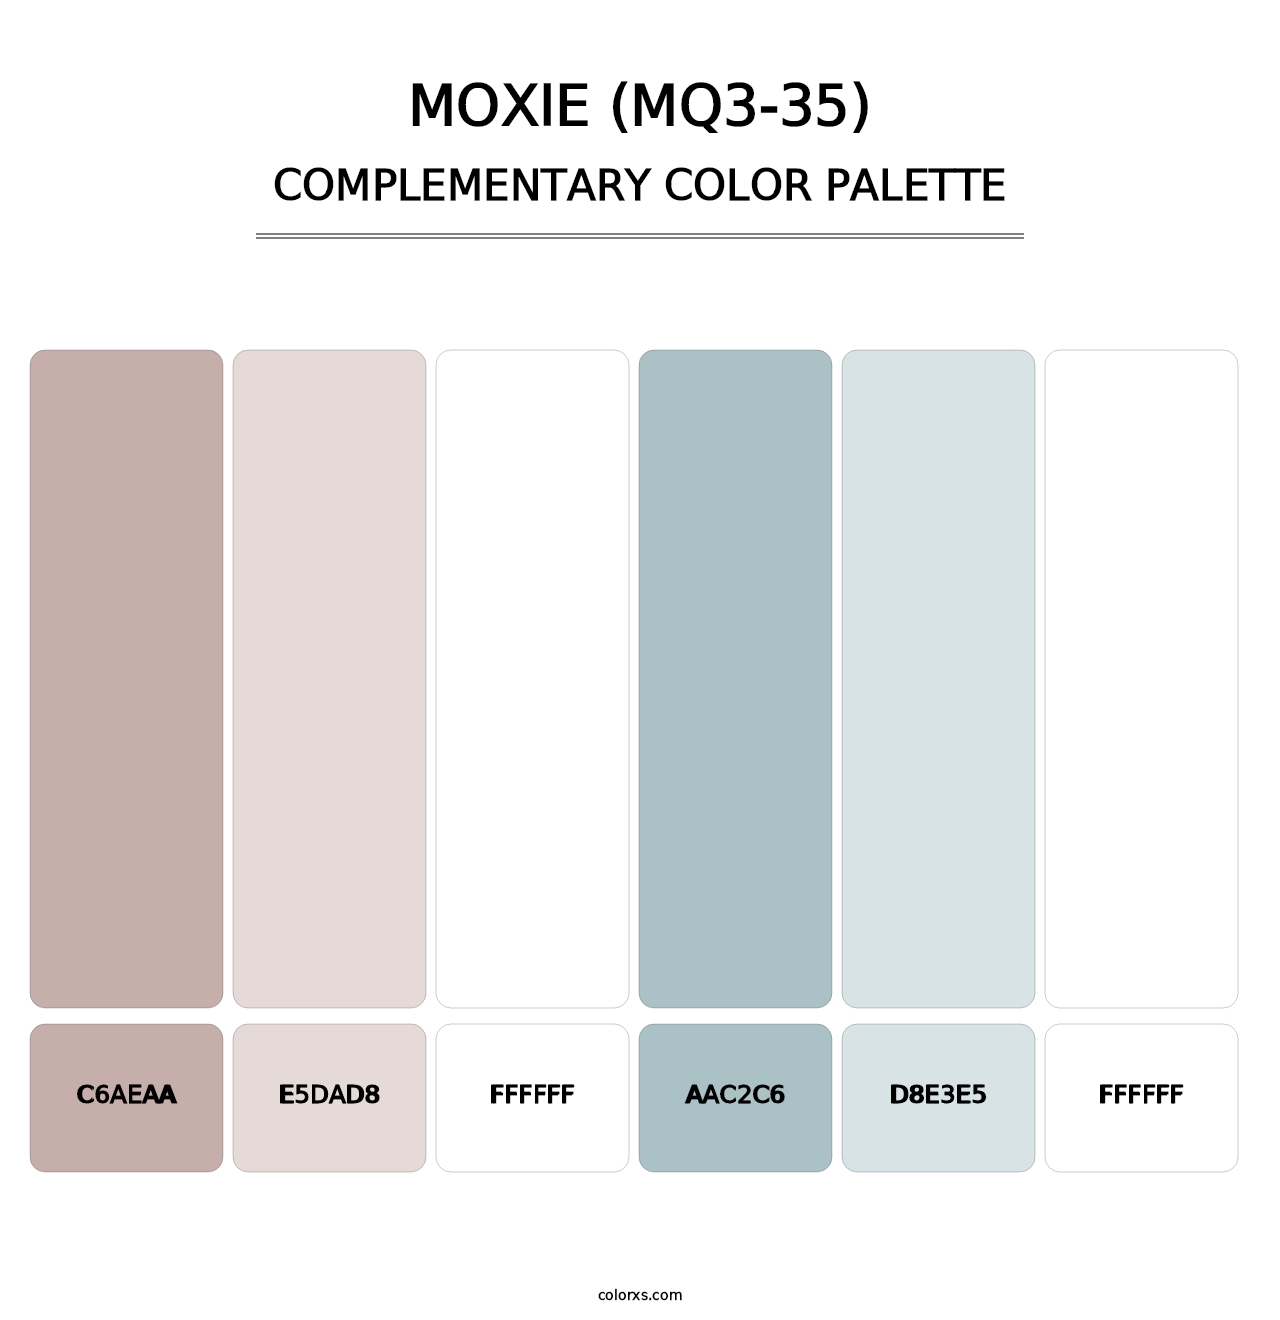 Moxie (MQ3-35) - Complementary Color Palette